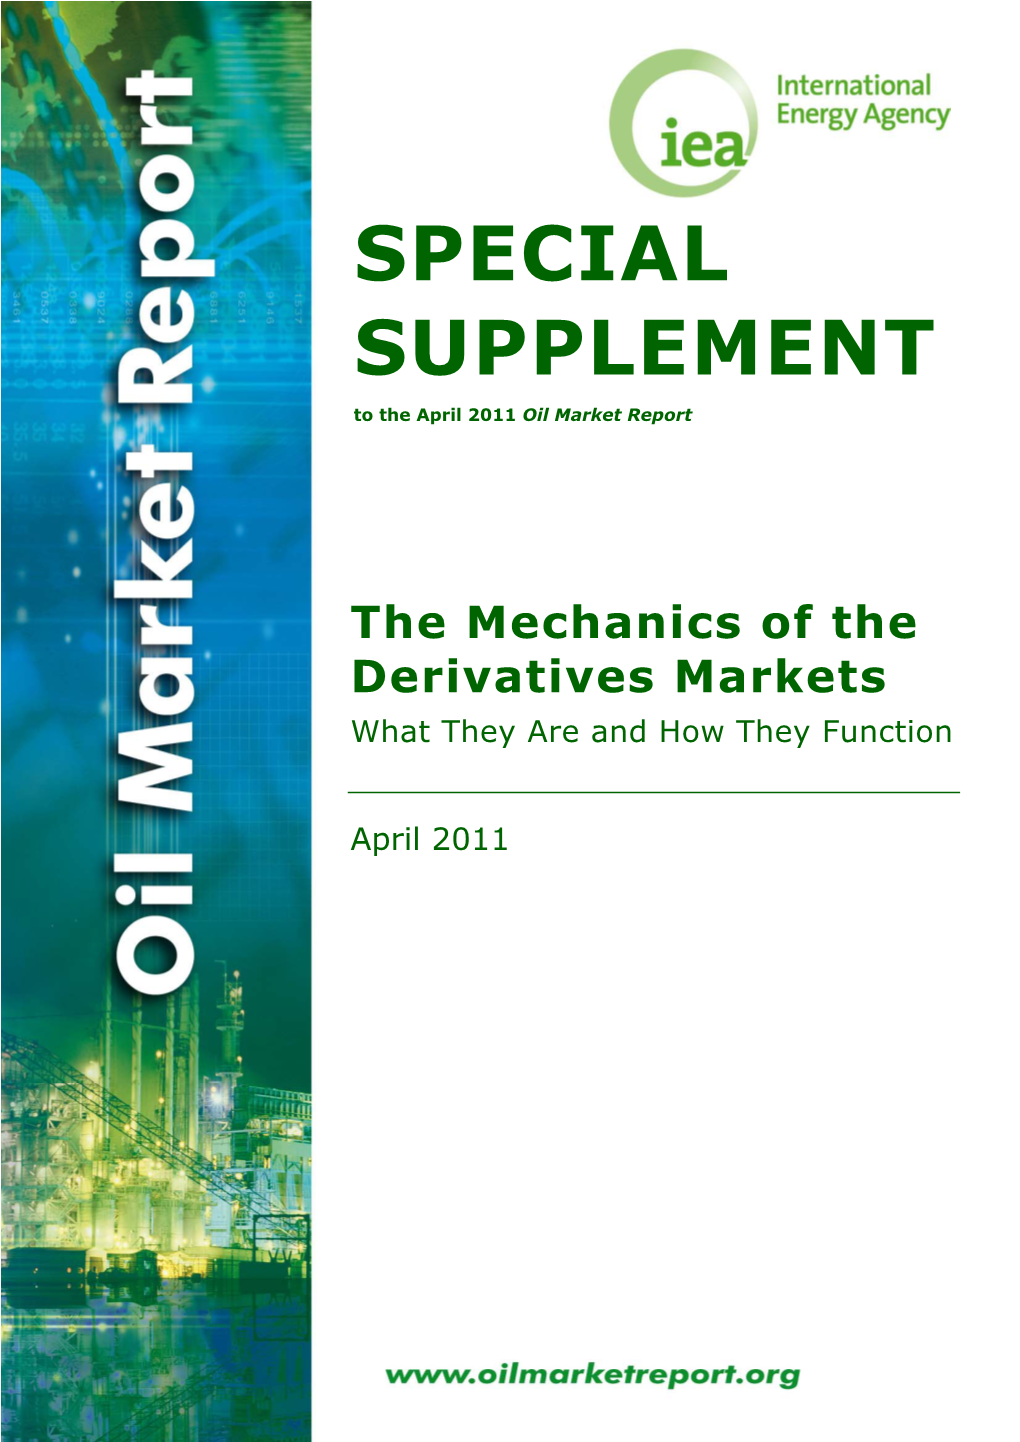 The Mechanics of the Derivatives Markets What They Are and How They Function